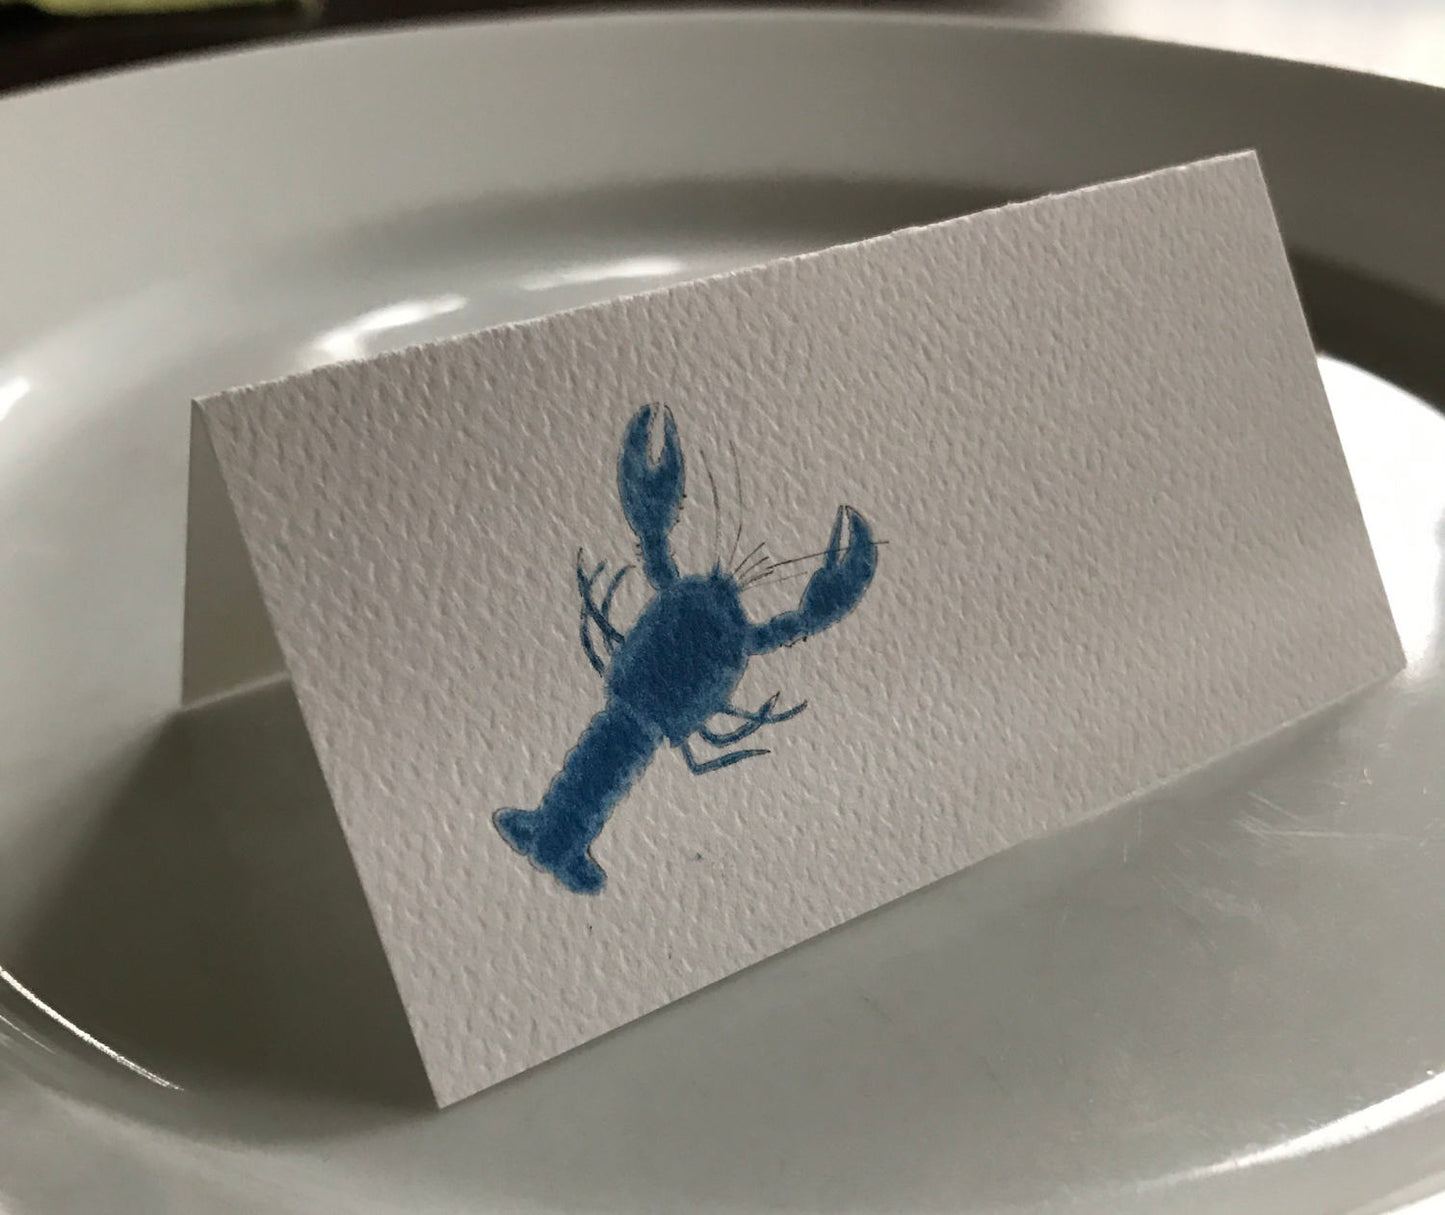 Lobster Place Cards, Blue Lobster, Red Lobster, Party Decor, Table Seating, Personalized Name Card, Blank Name Card, Lobster Bake, Beach.